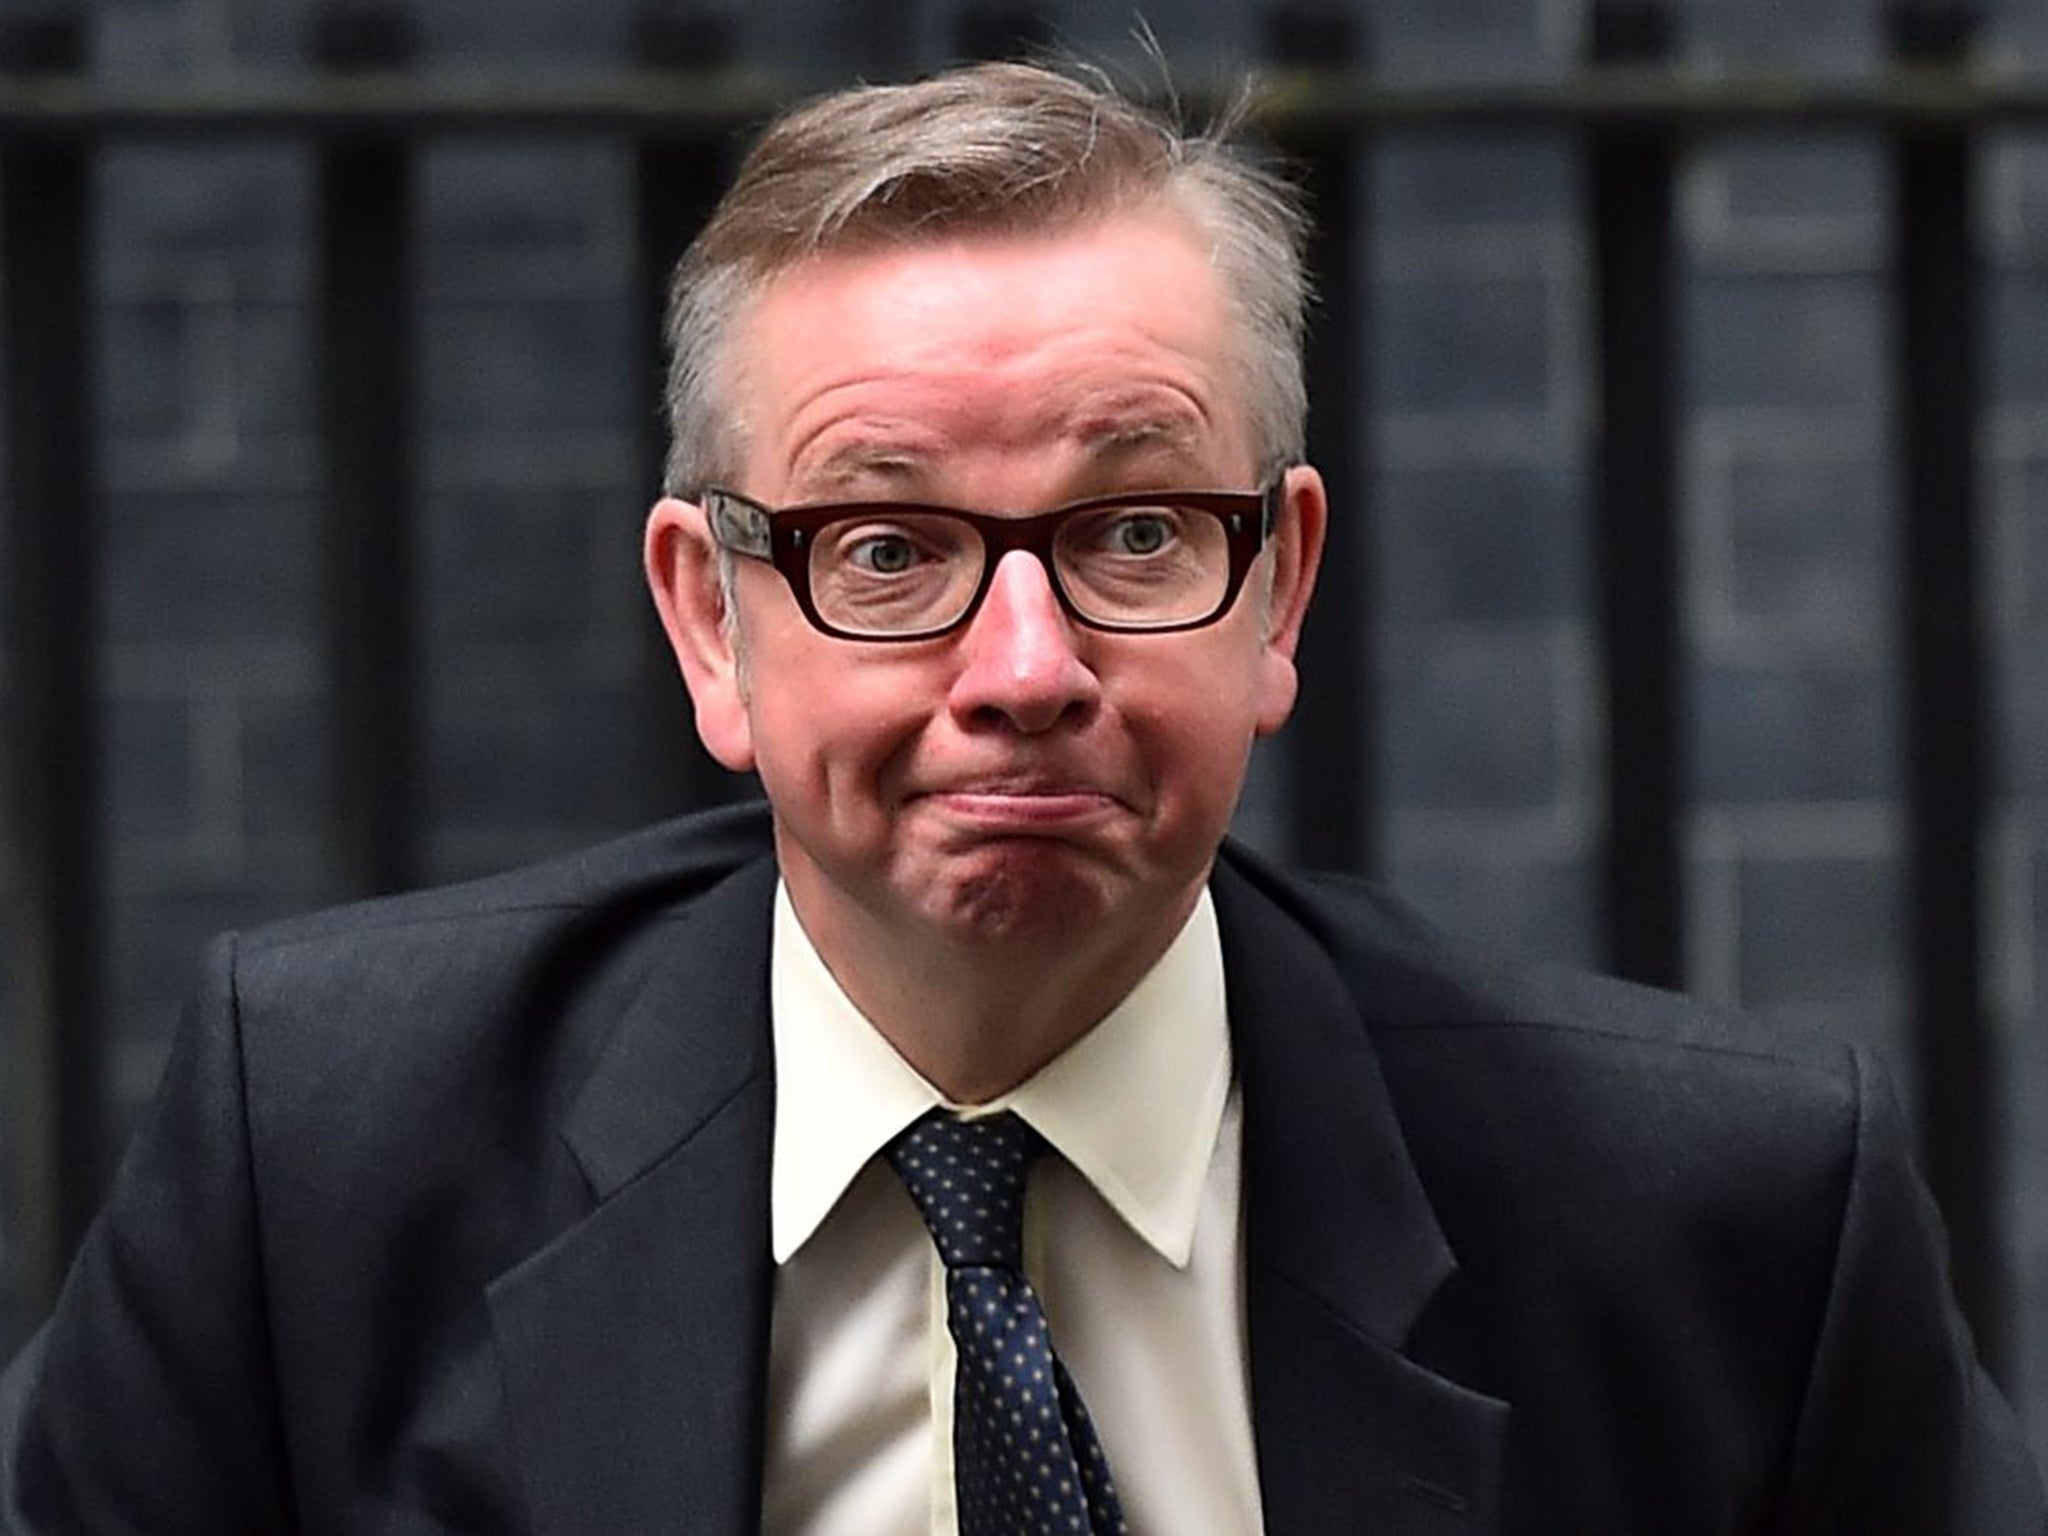 Michael Gove was sacked after Tory election strategist Lynton Crosby described him as ‘toxic’ (AFP)